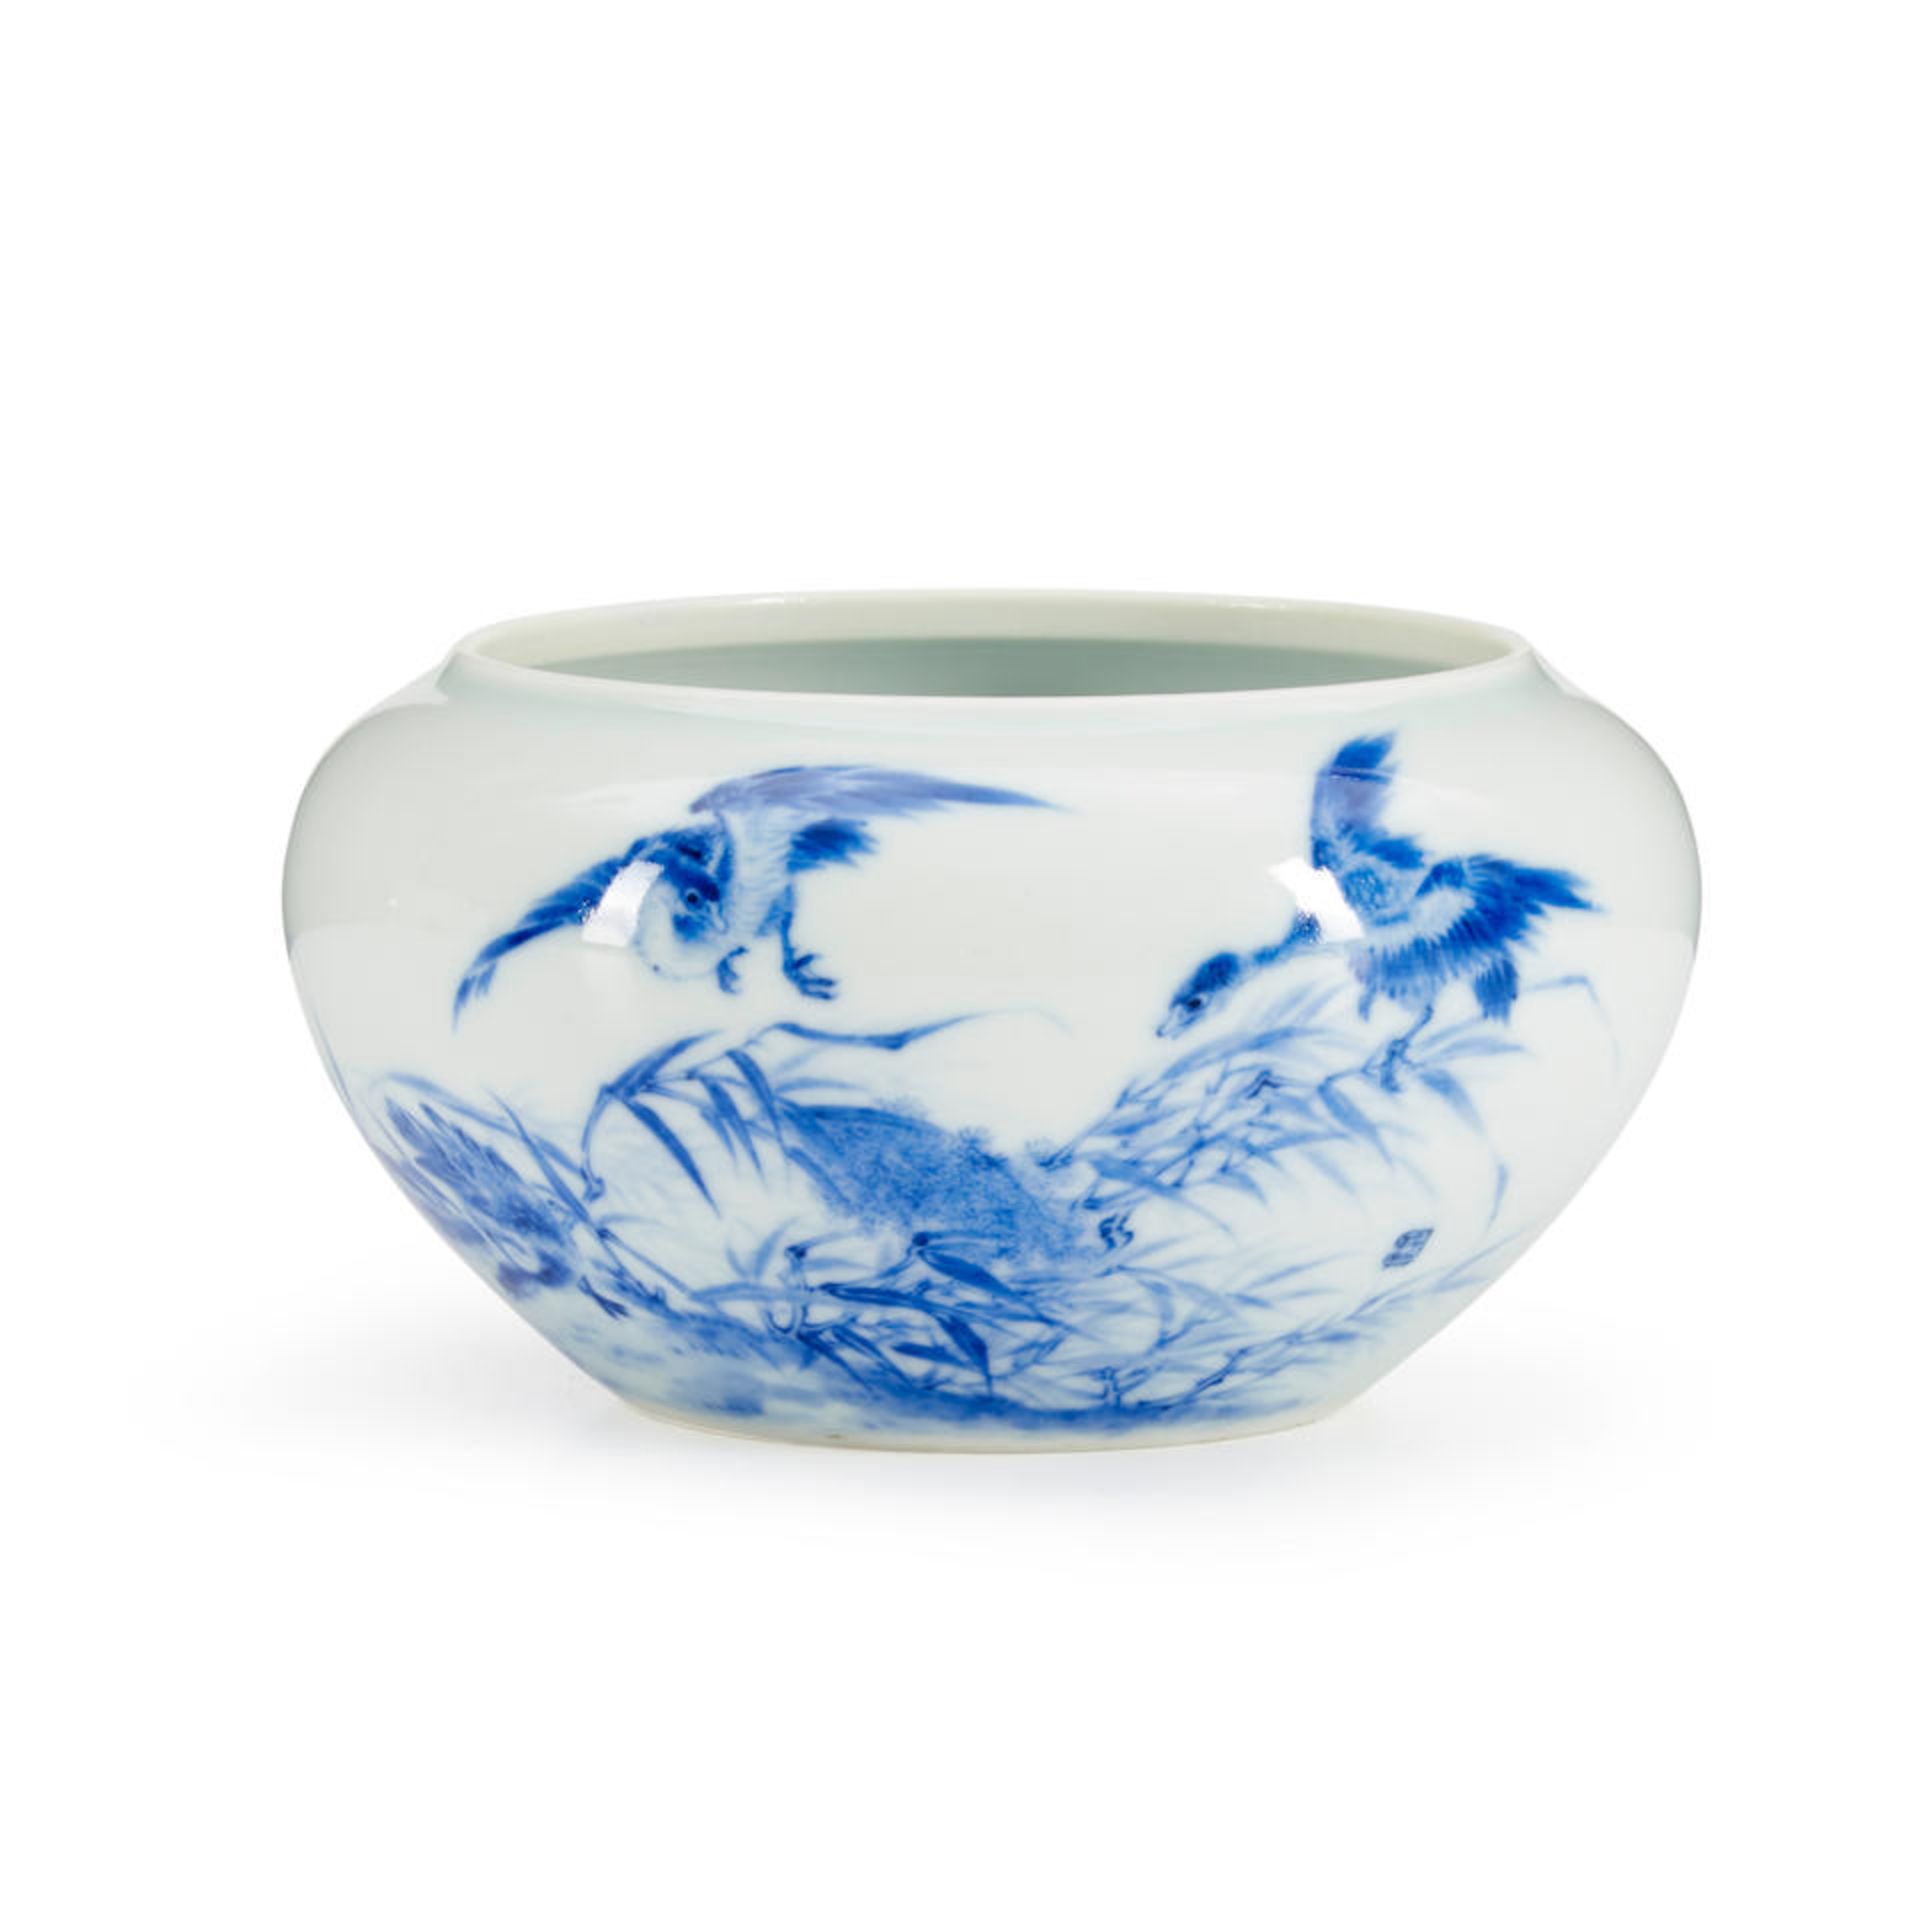 A BLUE AND WHITE WATER POT